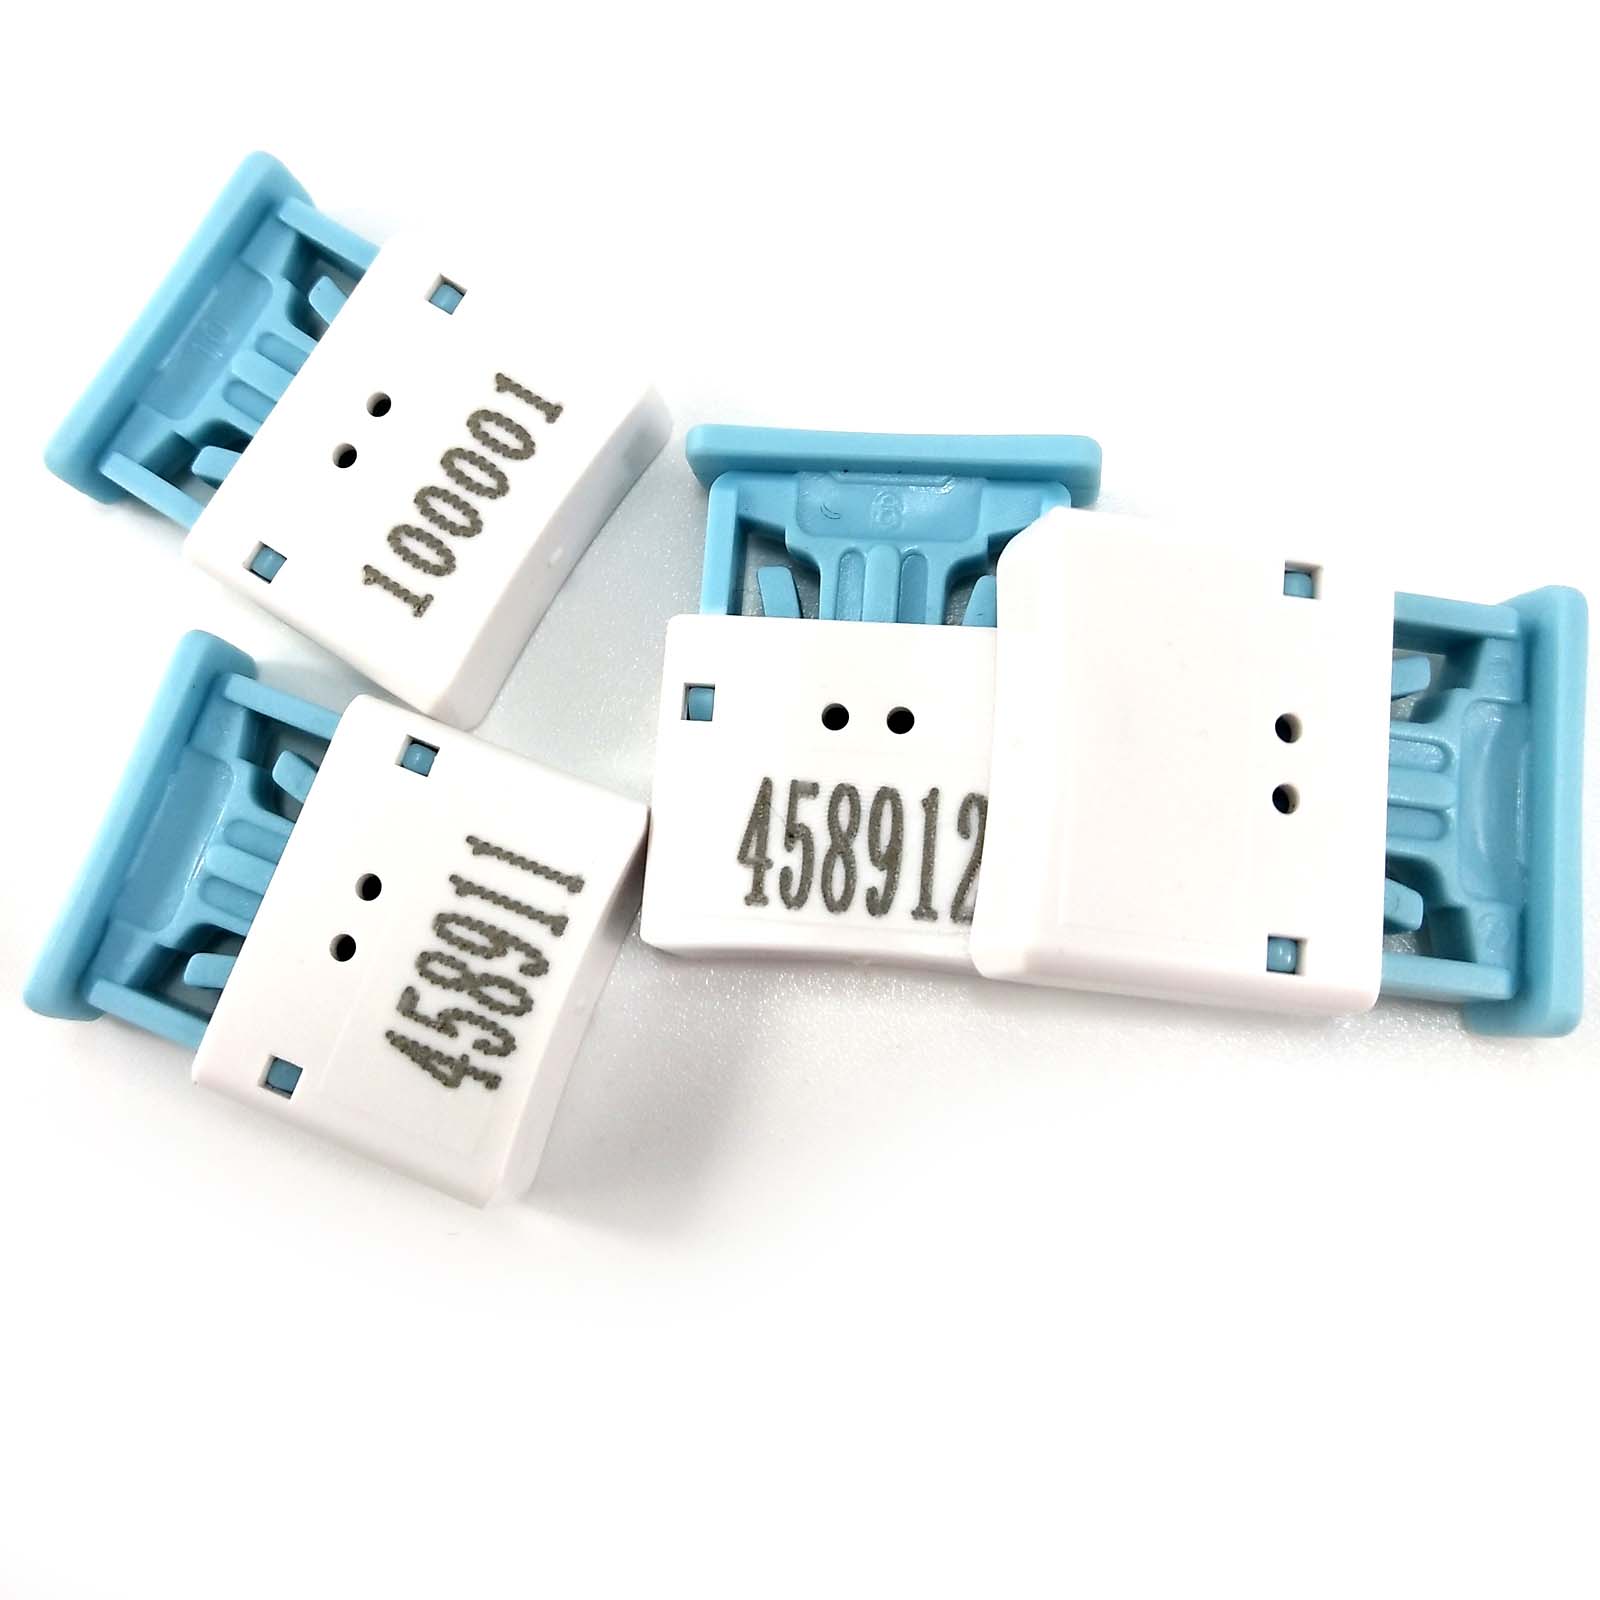 SL-24E Security twist meter seals with wire